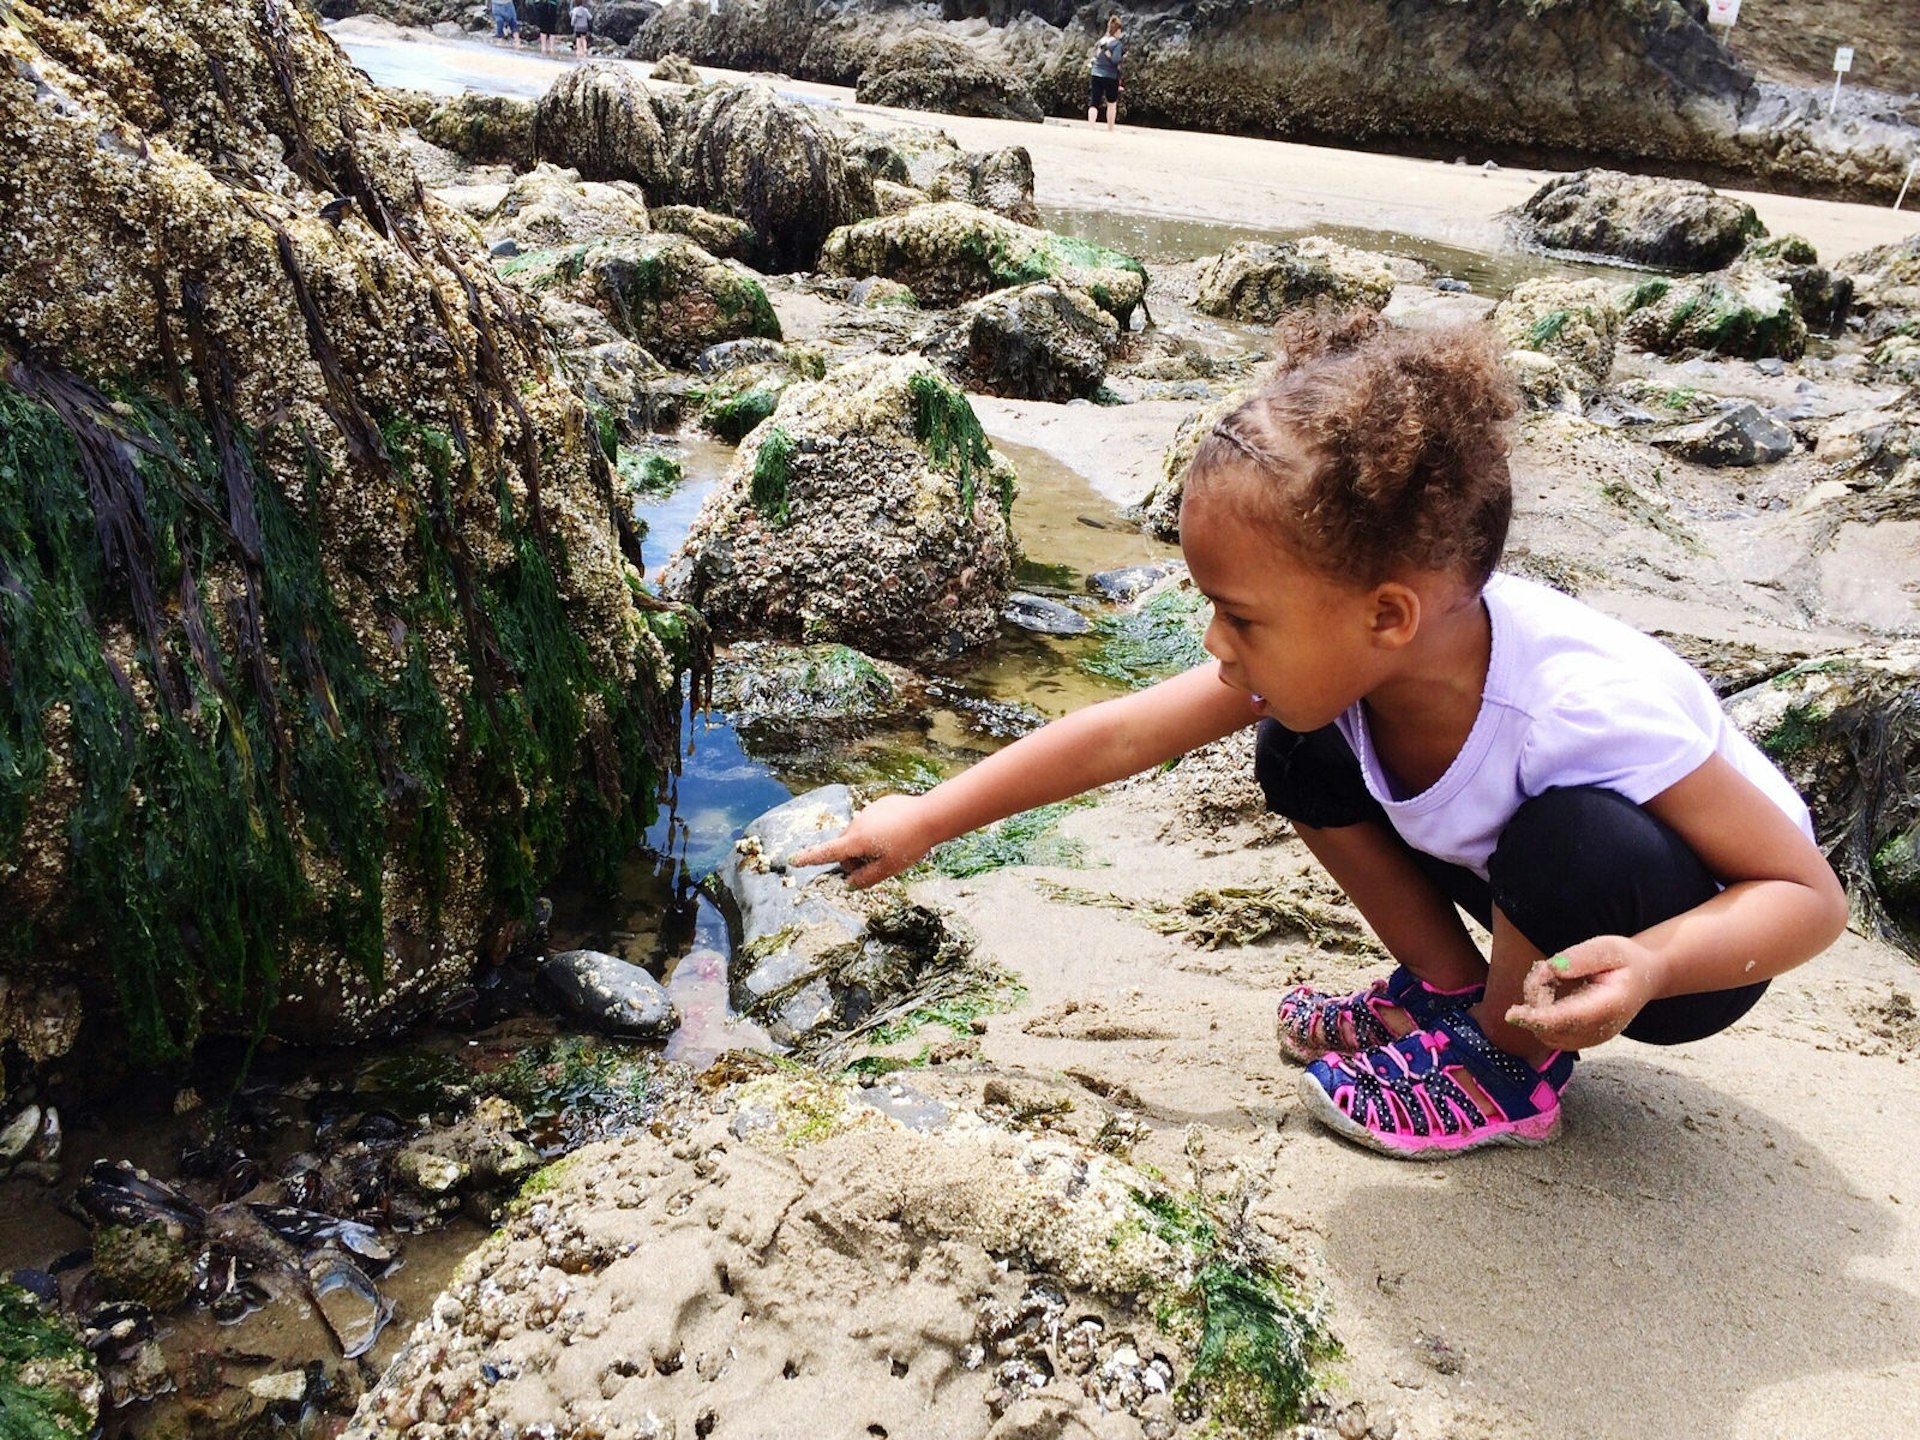 How to pack for a family beach trip - A toddler crouches and points at a rock pool on a sandy beach © Sarah Kelly / EyeEm / Getty Images